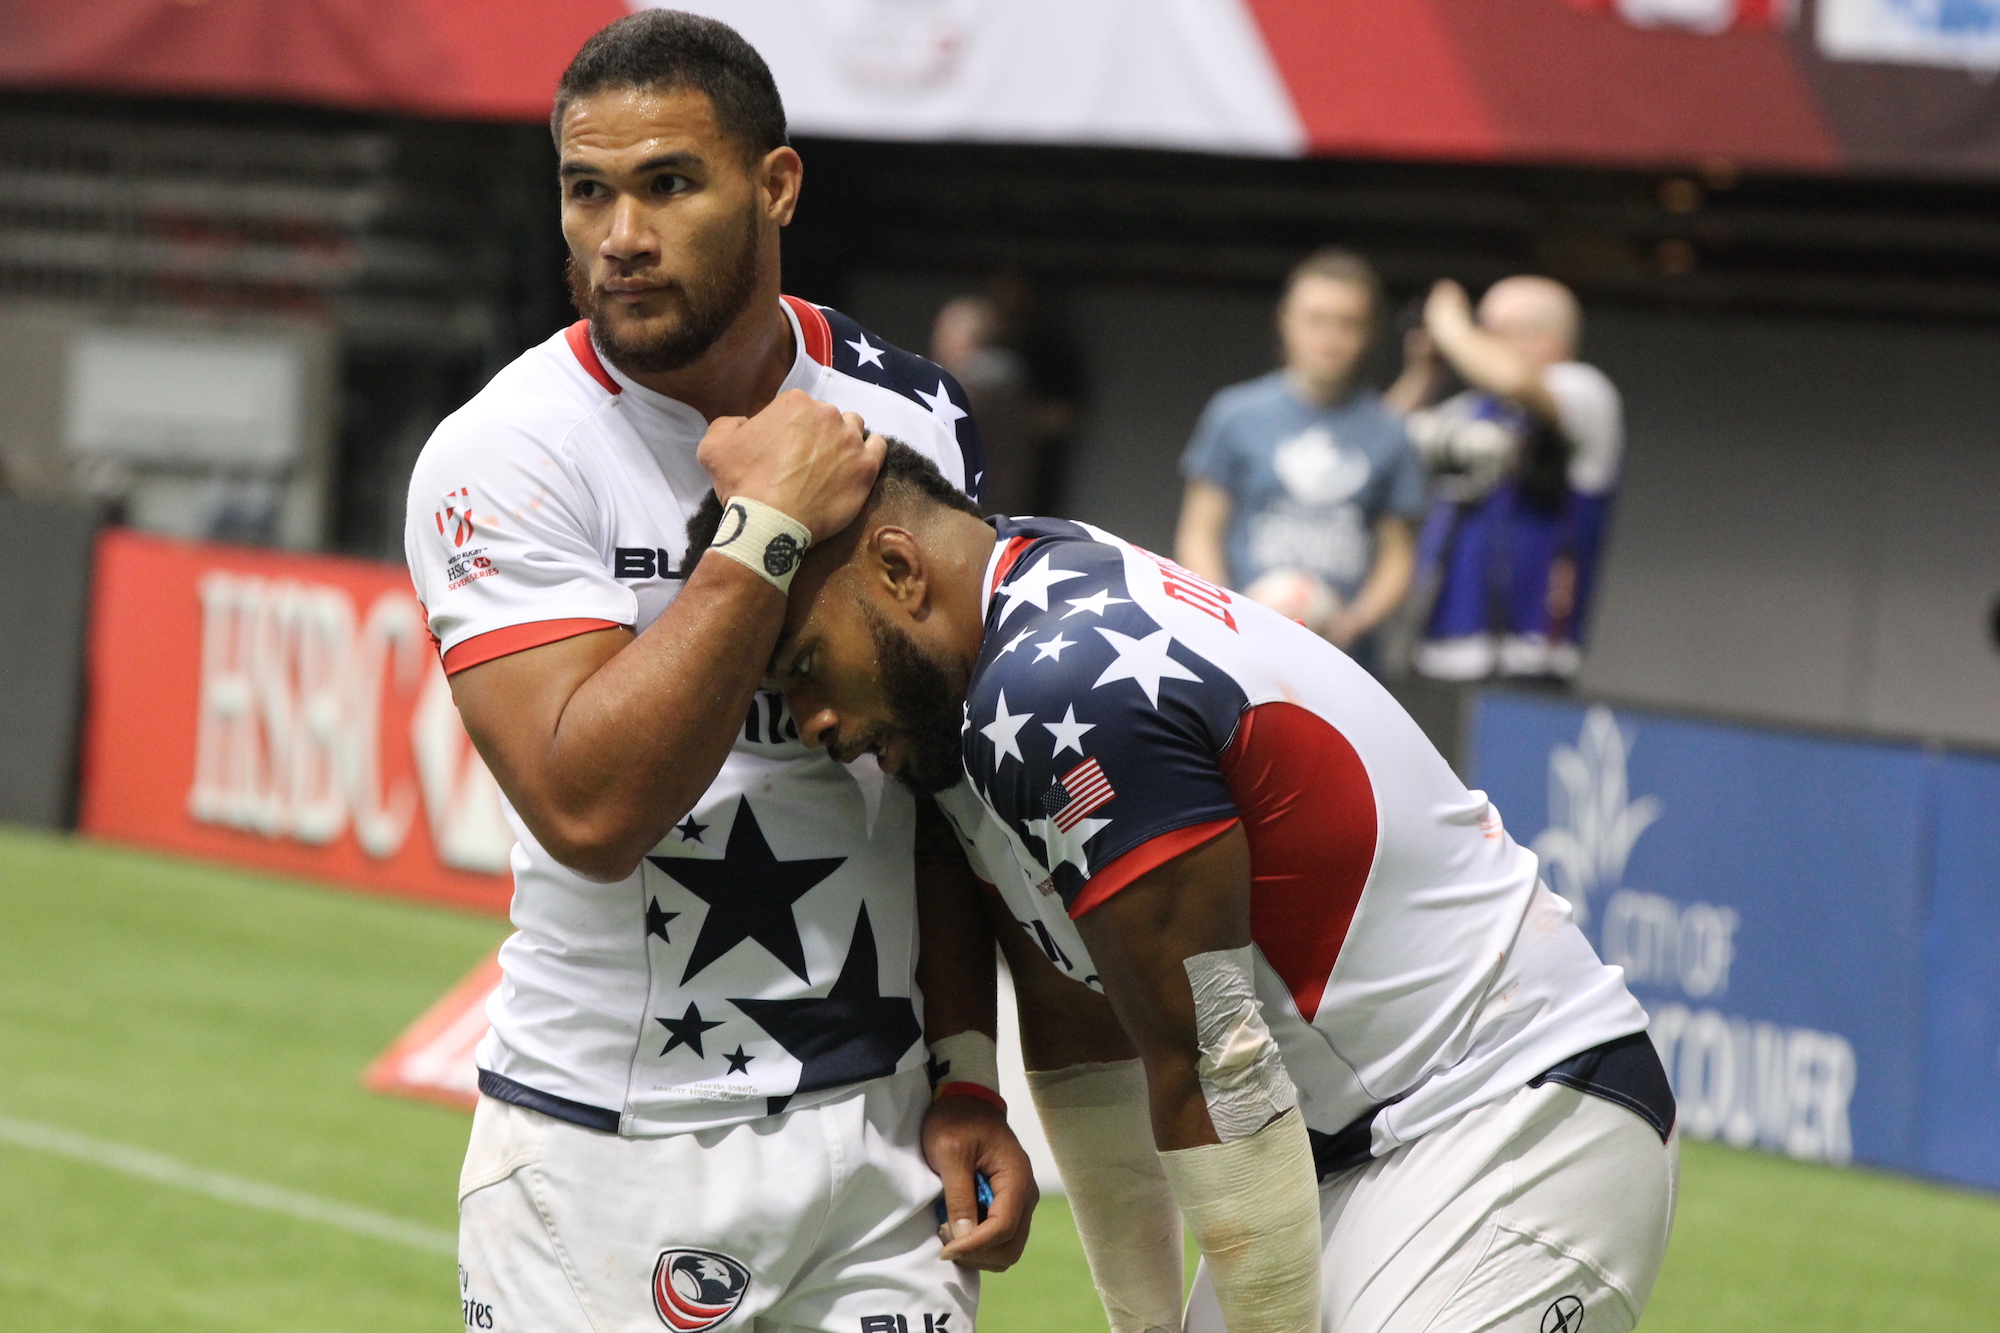 USA 7s team at the Canada 7s rugby tournament 2017. Eric Huss for Goff Rugby Report.